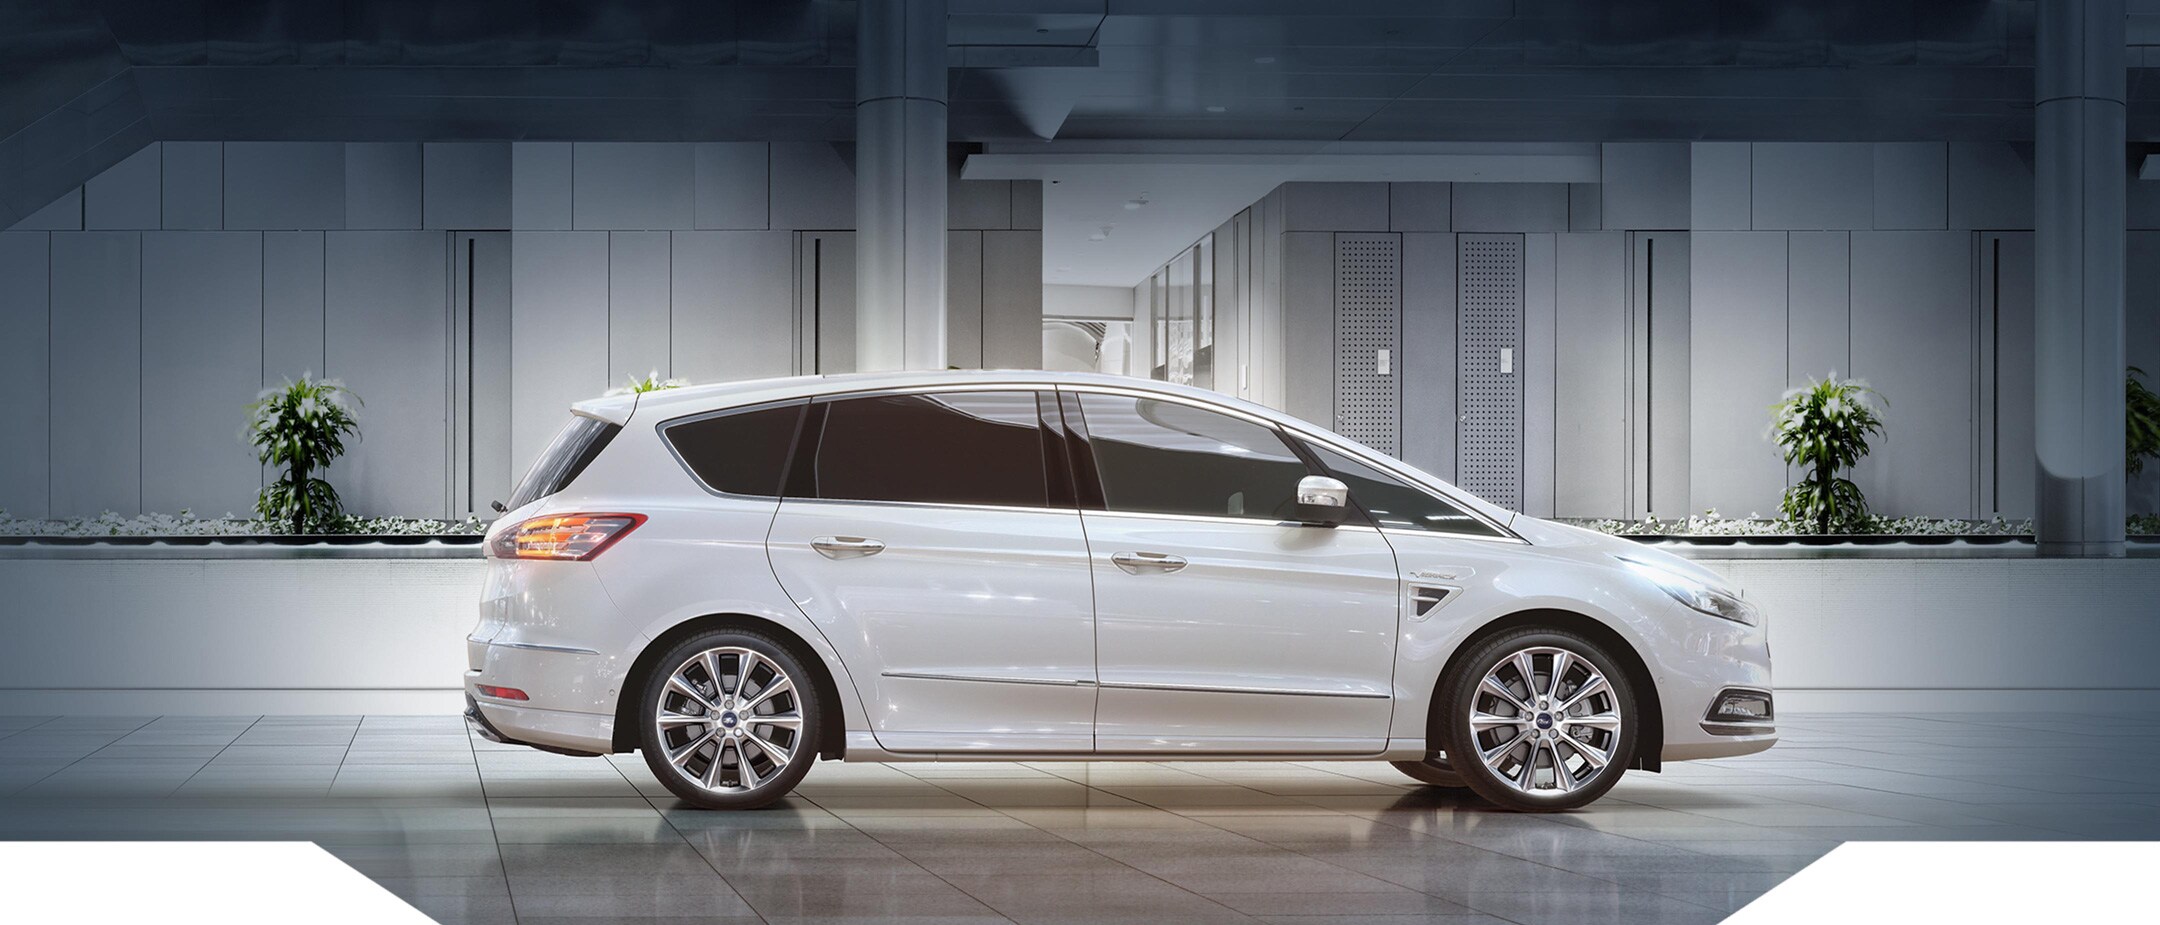 White Ford S-MAX Vignale from right view standing in front of a luxurious house